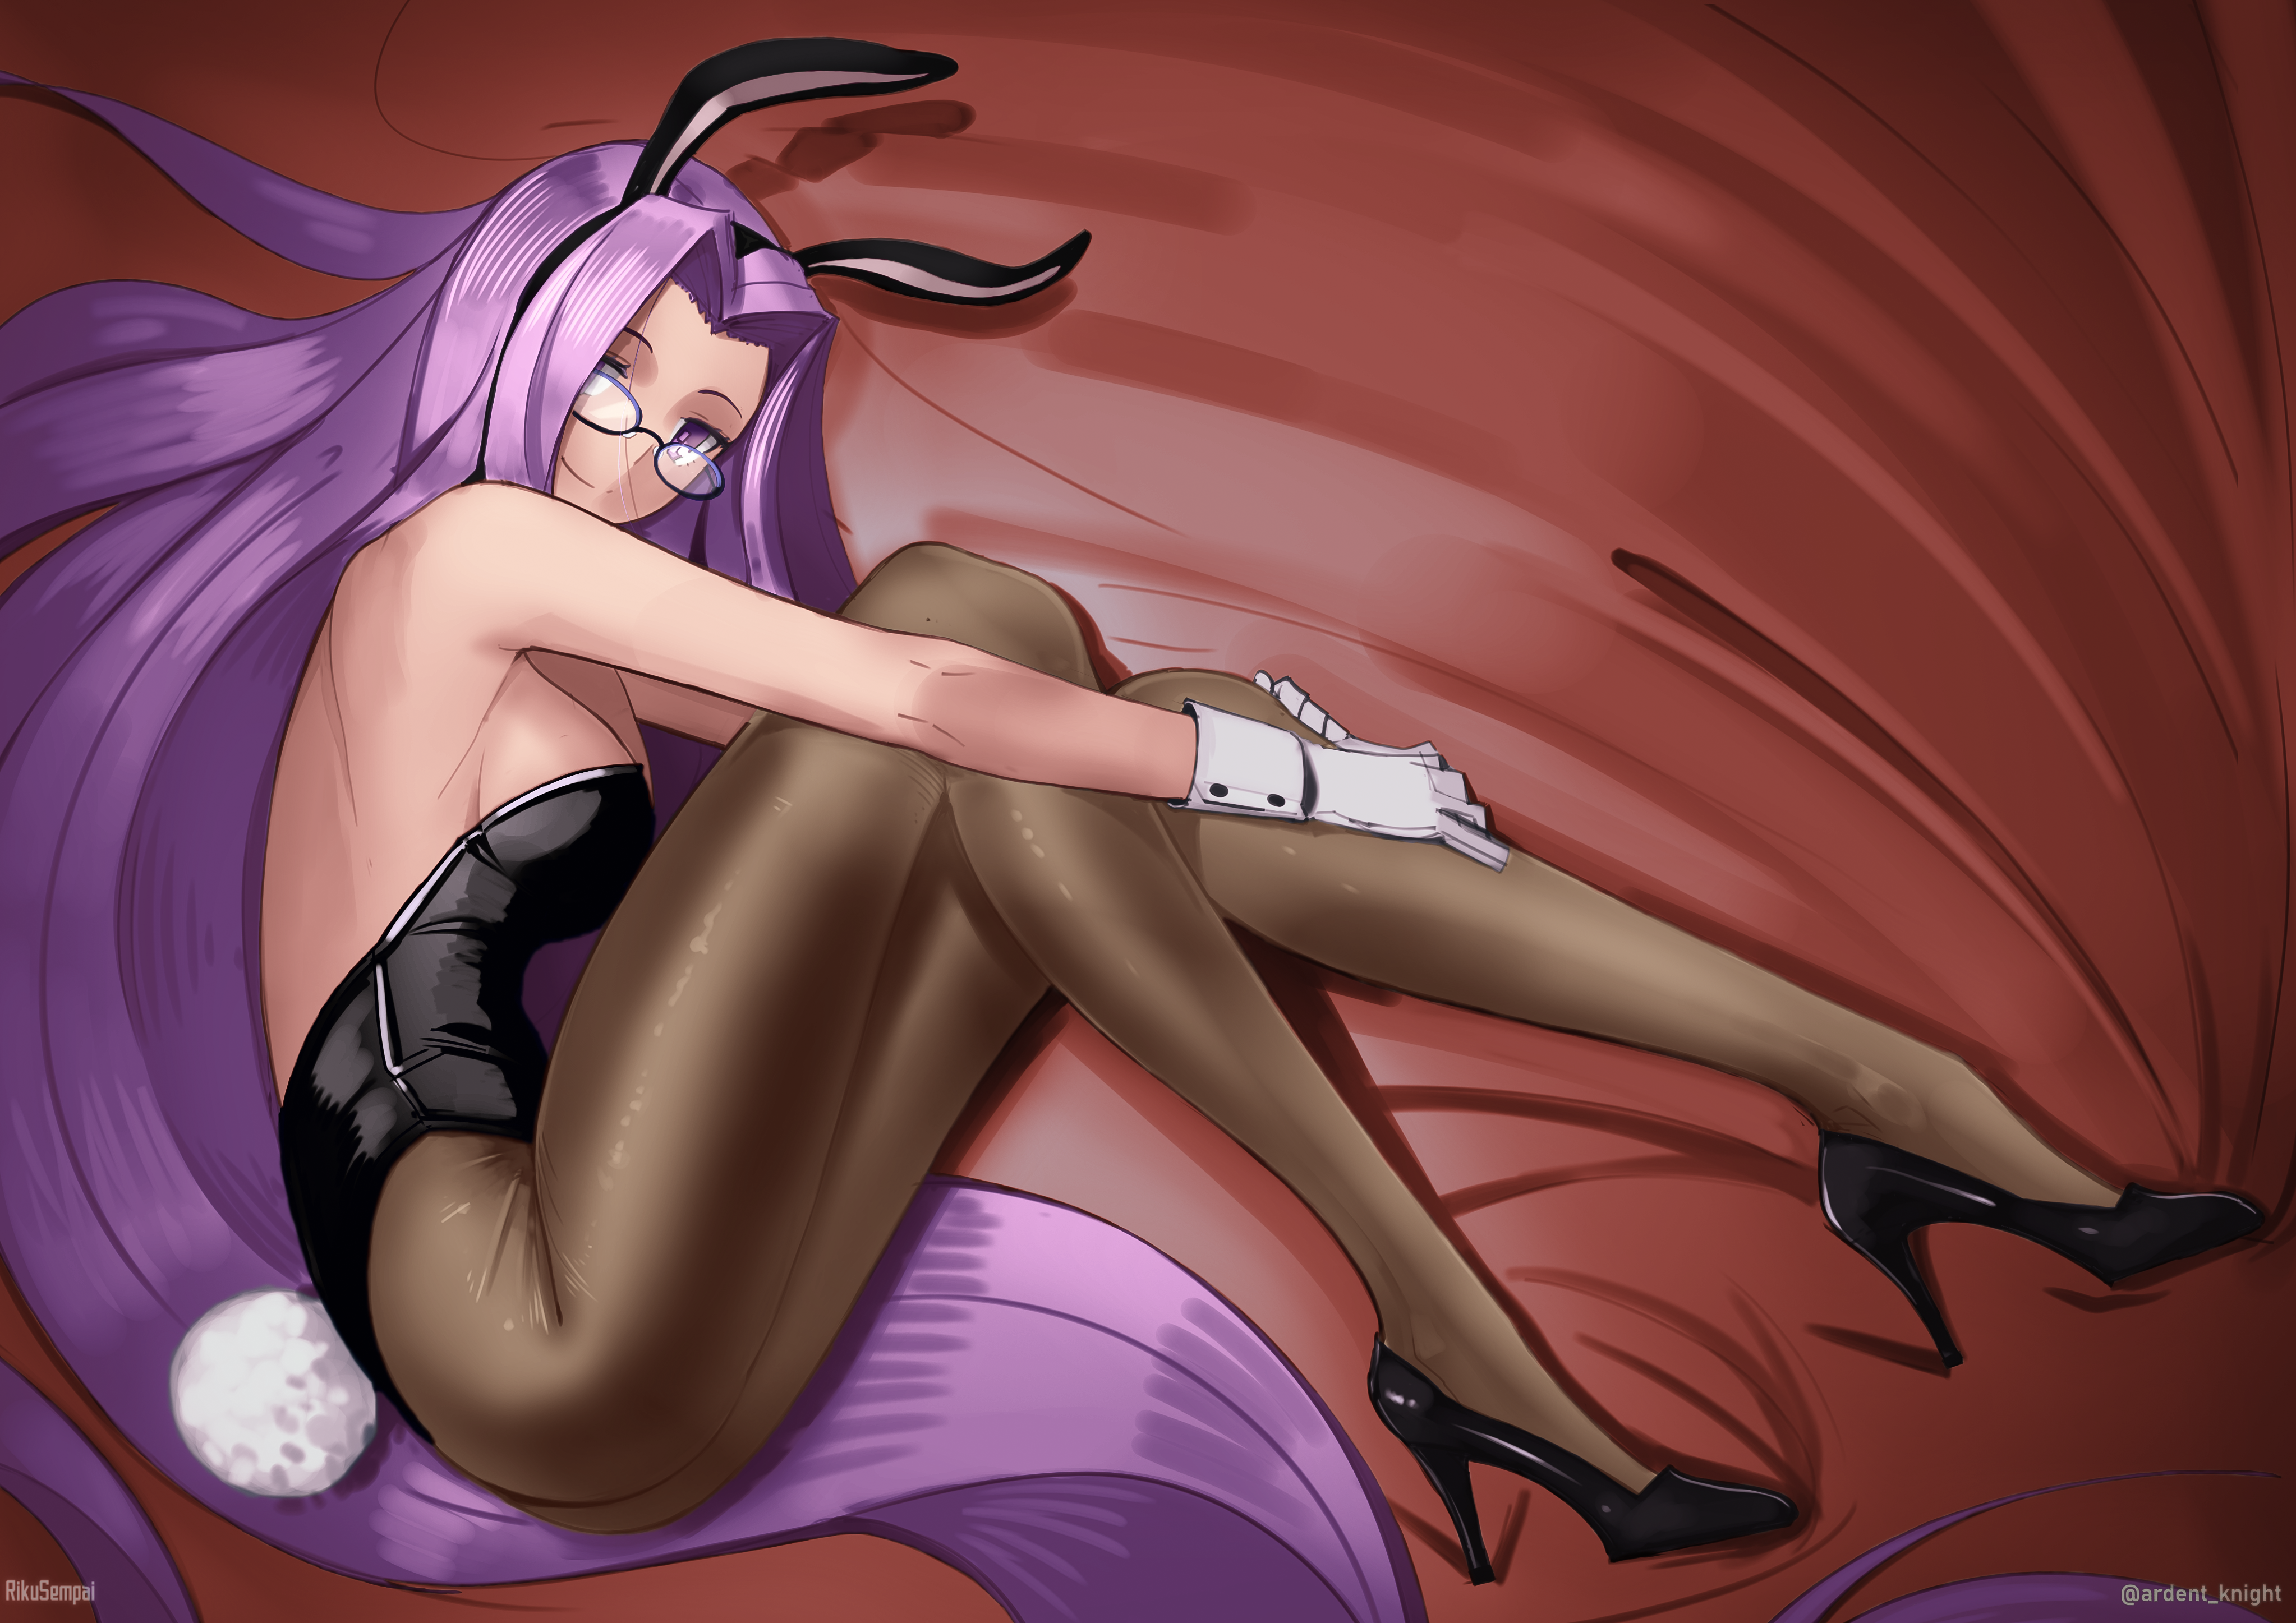 Anime 4093x2894 Fate series Fate/Stay Night Rider (Fate/Stay Night) anime anime girls Fate/Grand Order fate/stay night: heaven's feel bunny suit 2D big boobs no bra long hair purple hair animal ears women with glasses bareback thighs smiling purple eyes sideboob pantyhose fan art ass